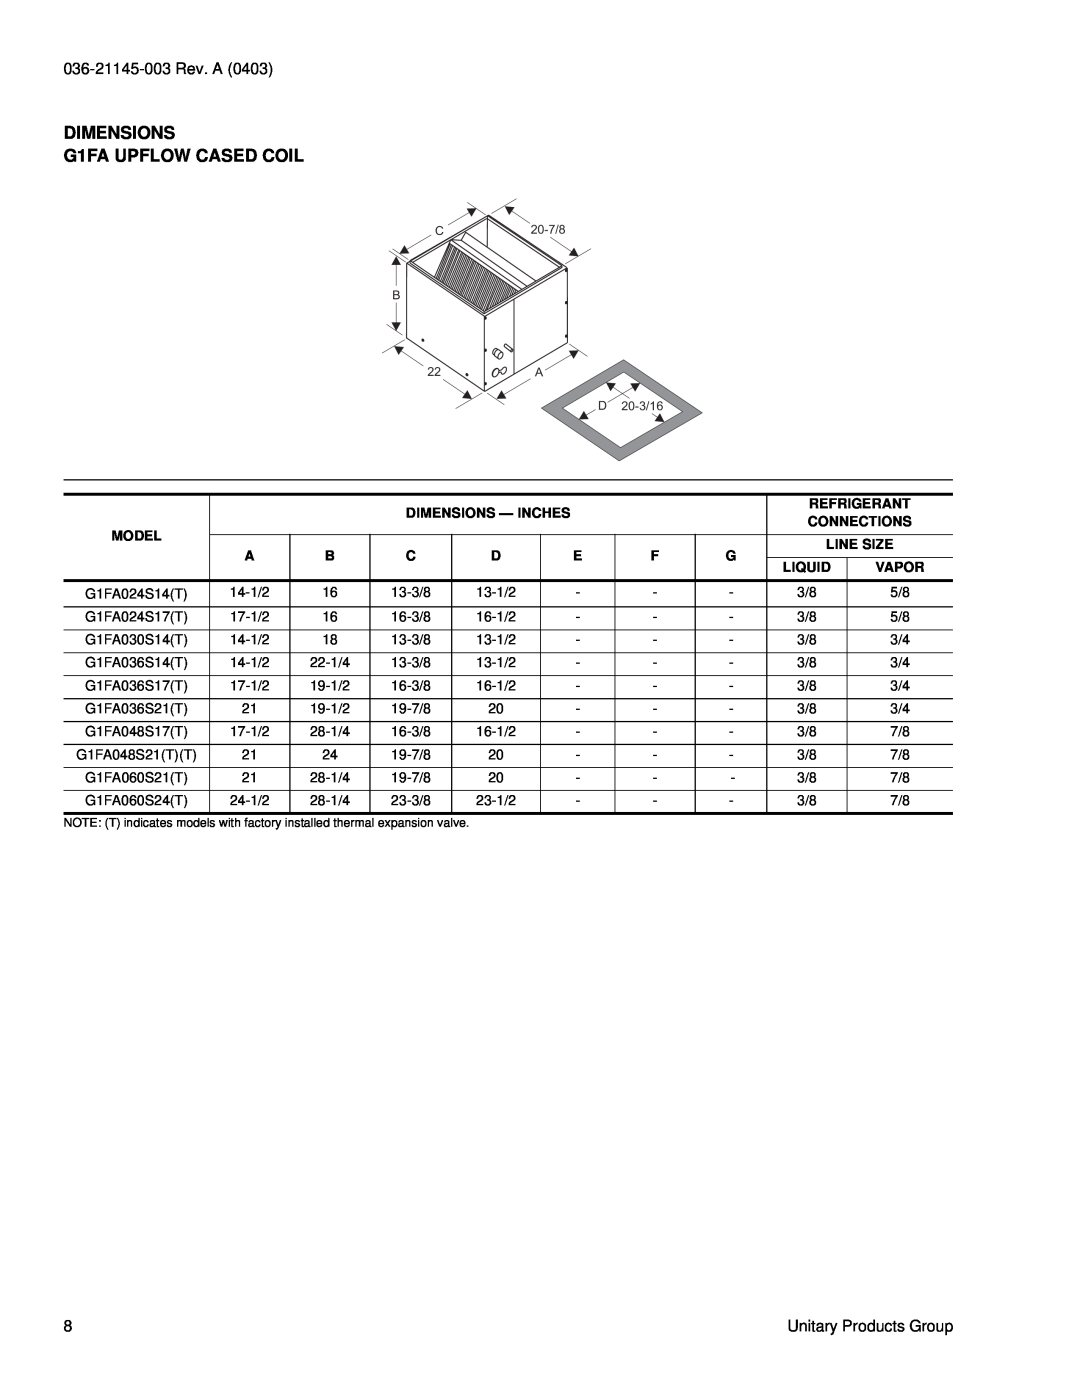 York GNA, GHA, GFD, GHD, GUA, GFA specifications DIMENSIONS G1FA UPFLOW CASED COIL, 036-21145-003Rev. A 